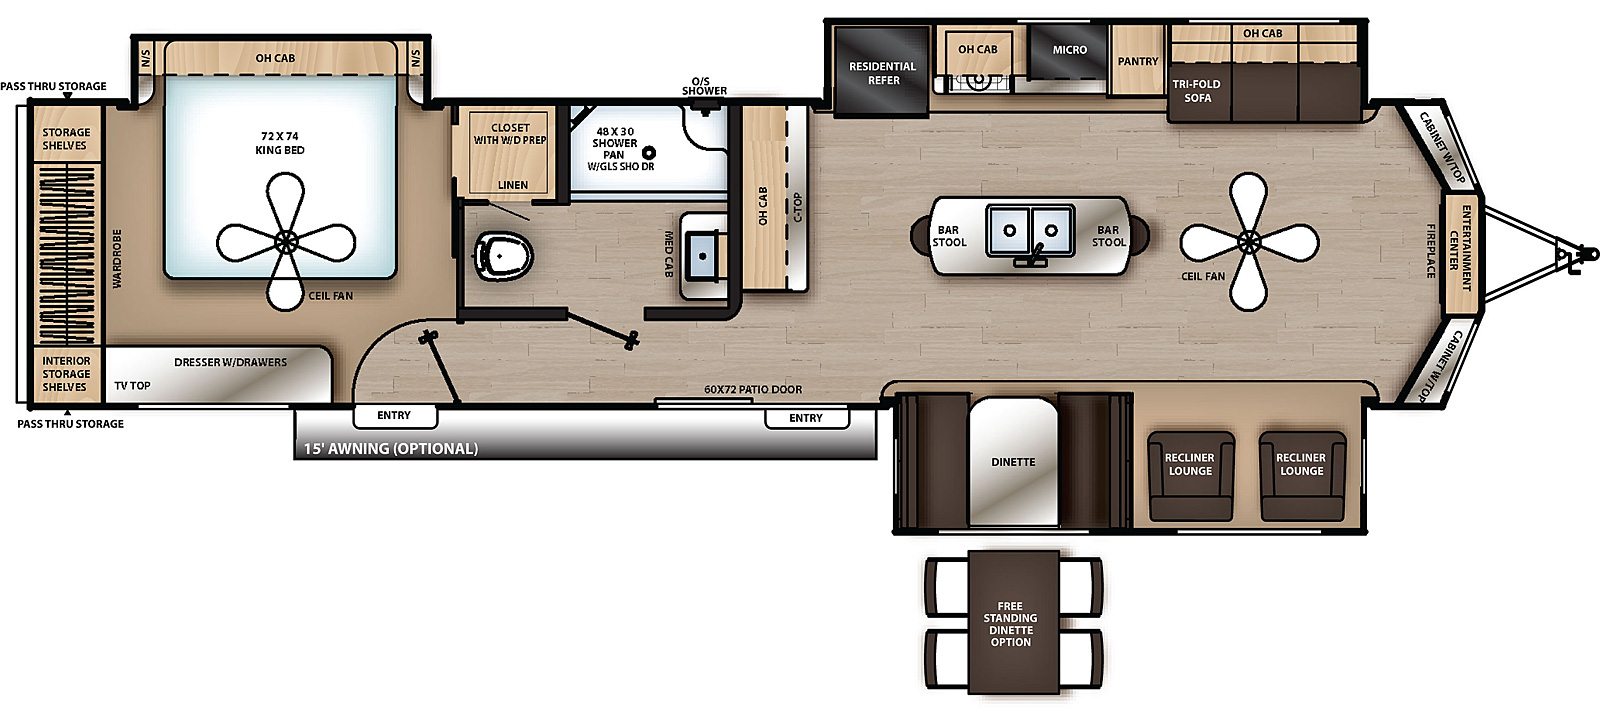 The 39MKTS has three slide outs with two on the off-door side and one on the door side and two entry doors on the doors side. Interior layout from front to back: entertainment center and cabinets on either side; off door side slide out containing sofa with overhead cabinet, pantry, microwave, cook top stove, overhead cabinet, and refrigerator; free standing island with double basin sink and bar stools, door side slide out containing recliner lounges and dinette; off door side countertop with overhead cabinet; off door side bathroom; and rear bedroom with off door side slide out containing side facing king bed, overhead cabinet, wardrobe, and storage.